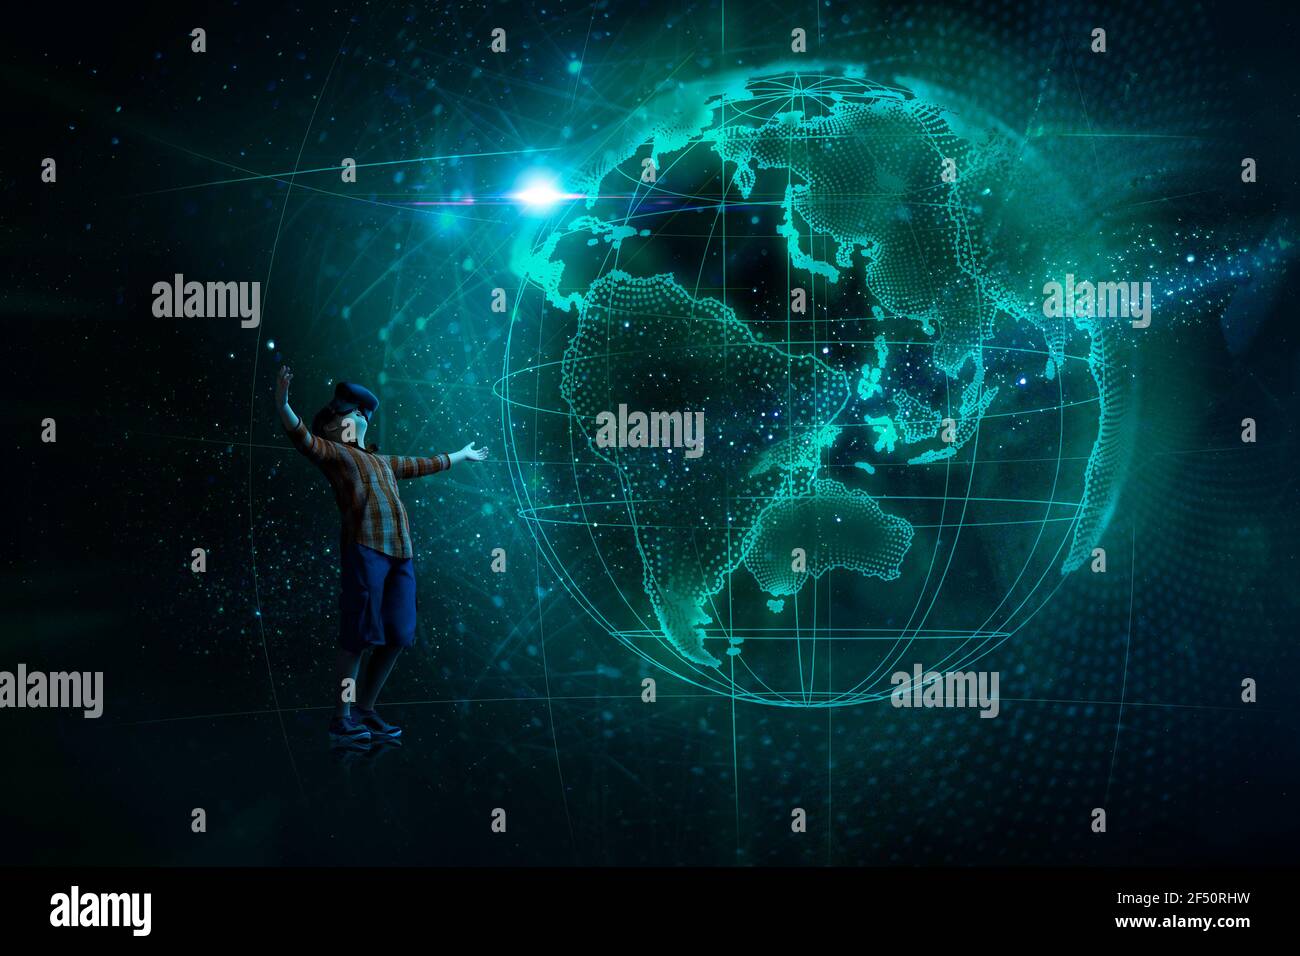 Curious boy in VR headset looking at holographic globe Stock Photo